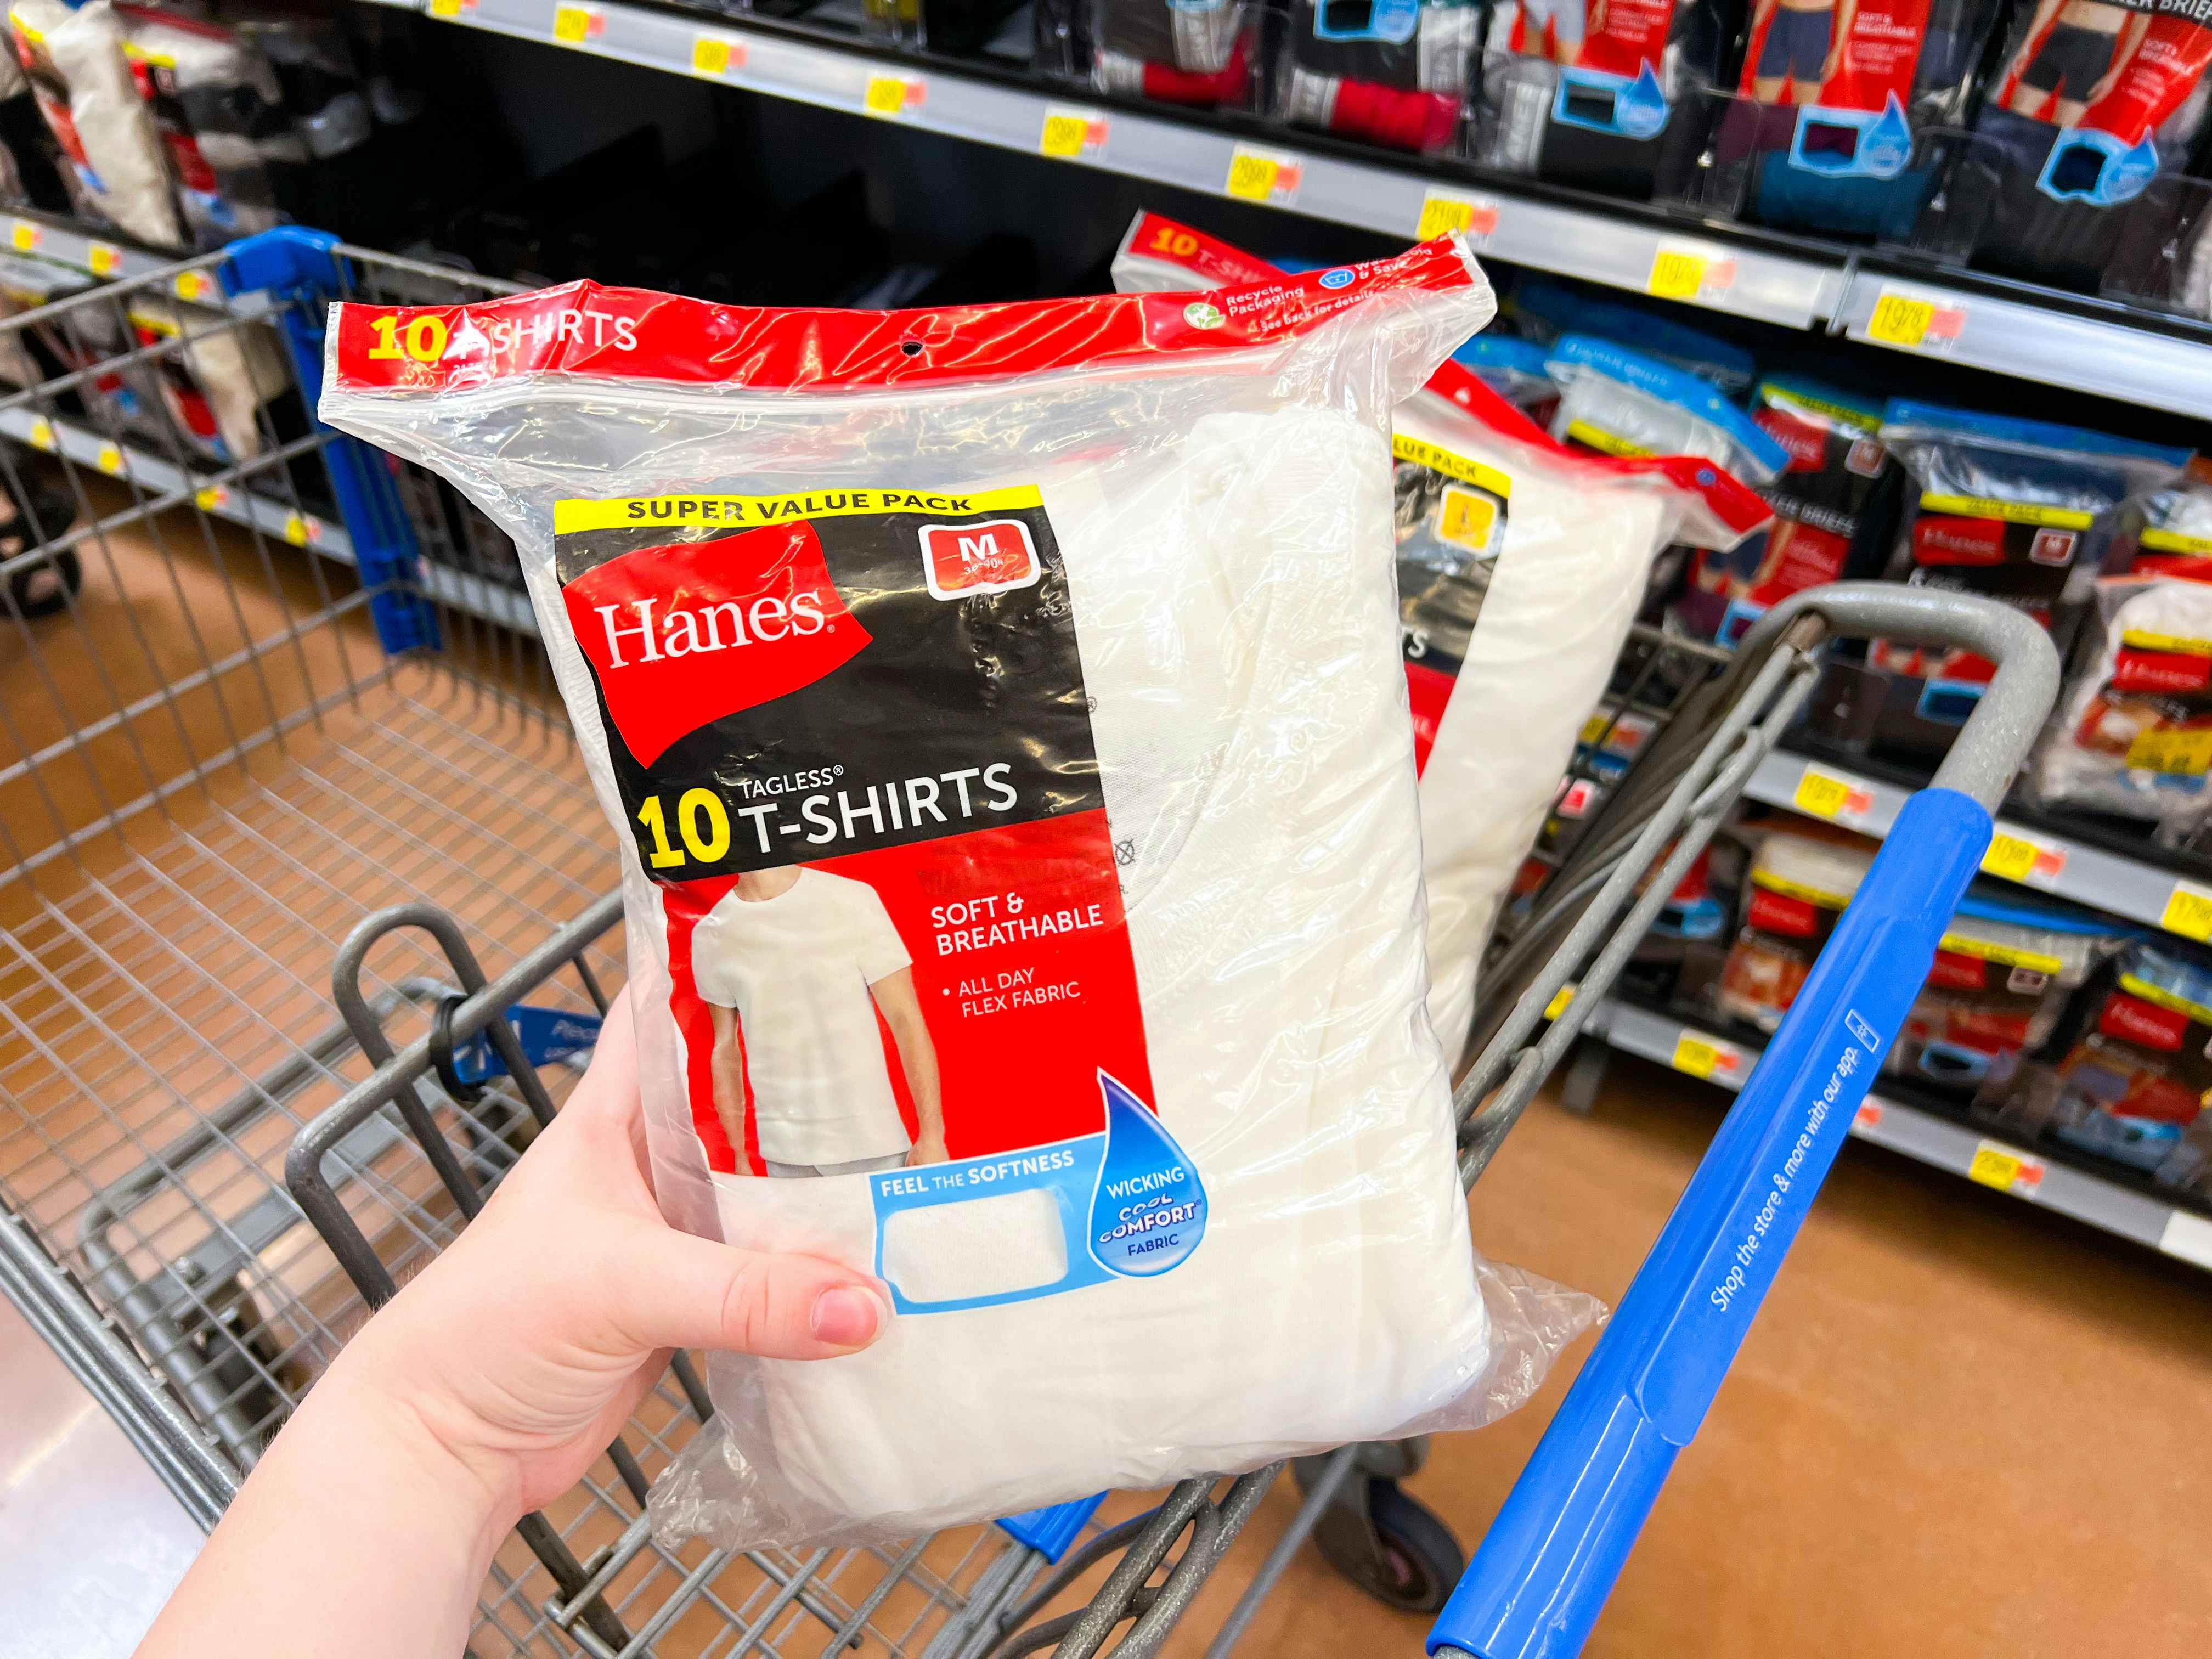 Hanes Men's 10-Pack Undershirts, Only $19.98 at Walmart